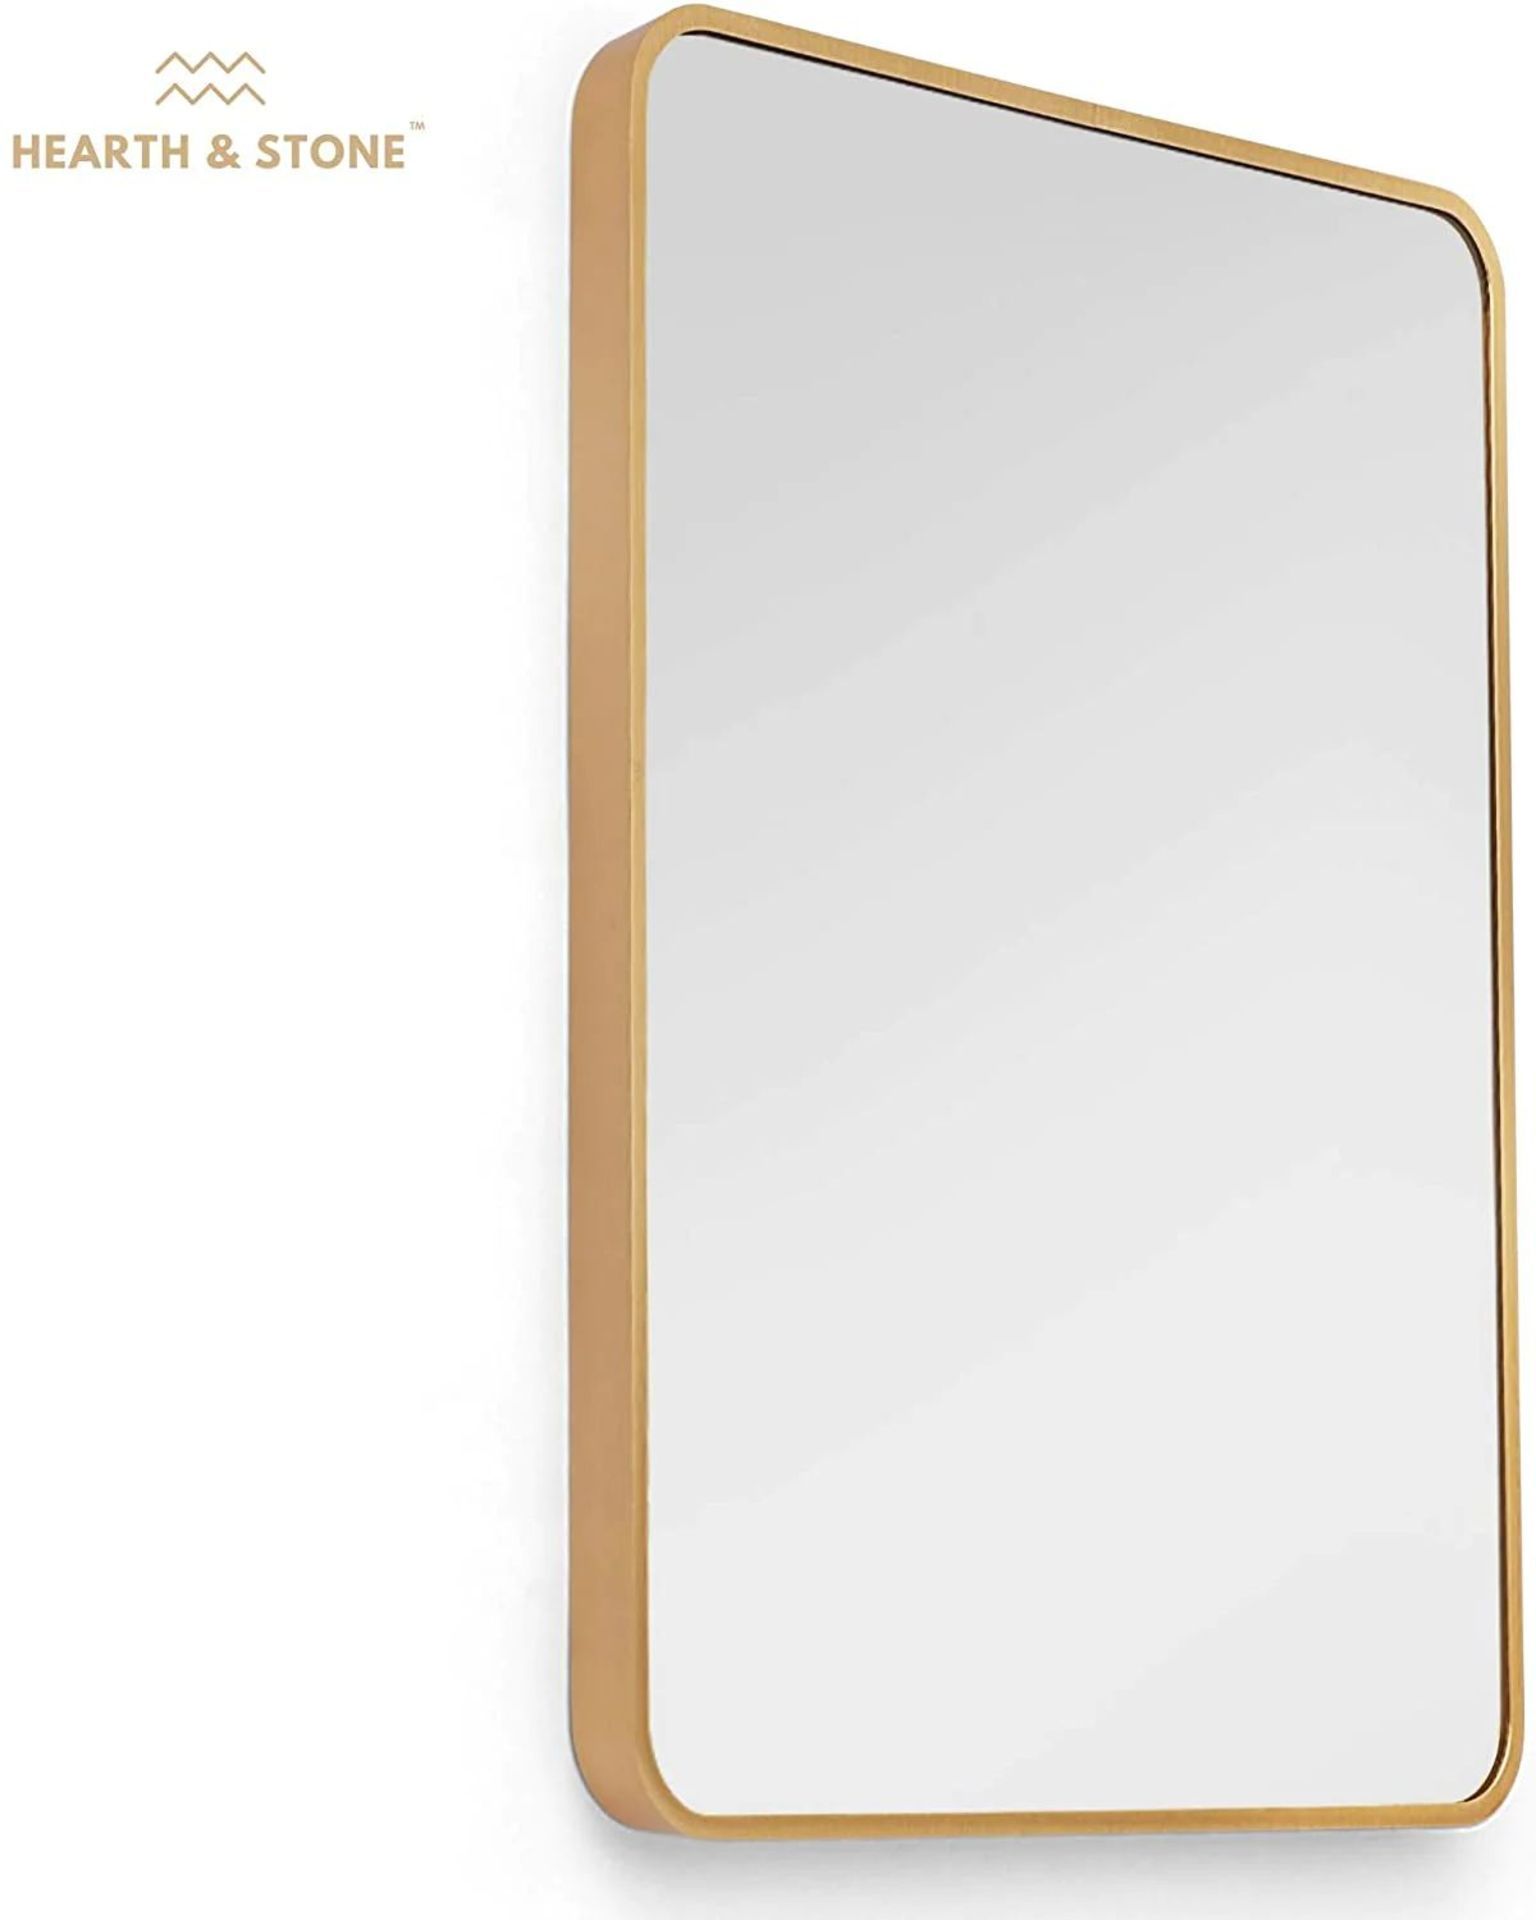 TRADE LOT 10 XBRAND NEW HEARTH AND STONE LUXURY GOLD FRAMED MIRROR RRP £199 R18.10/3.7 - Image 2 of 2